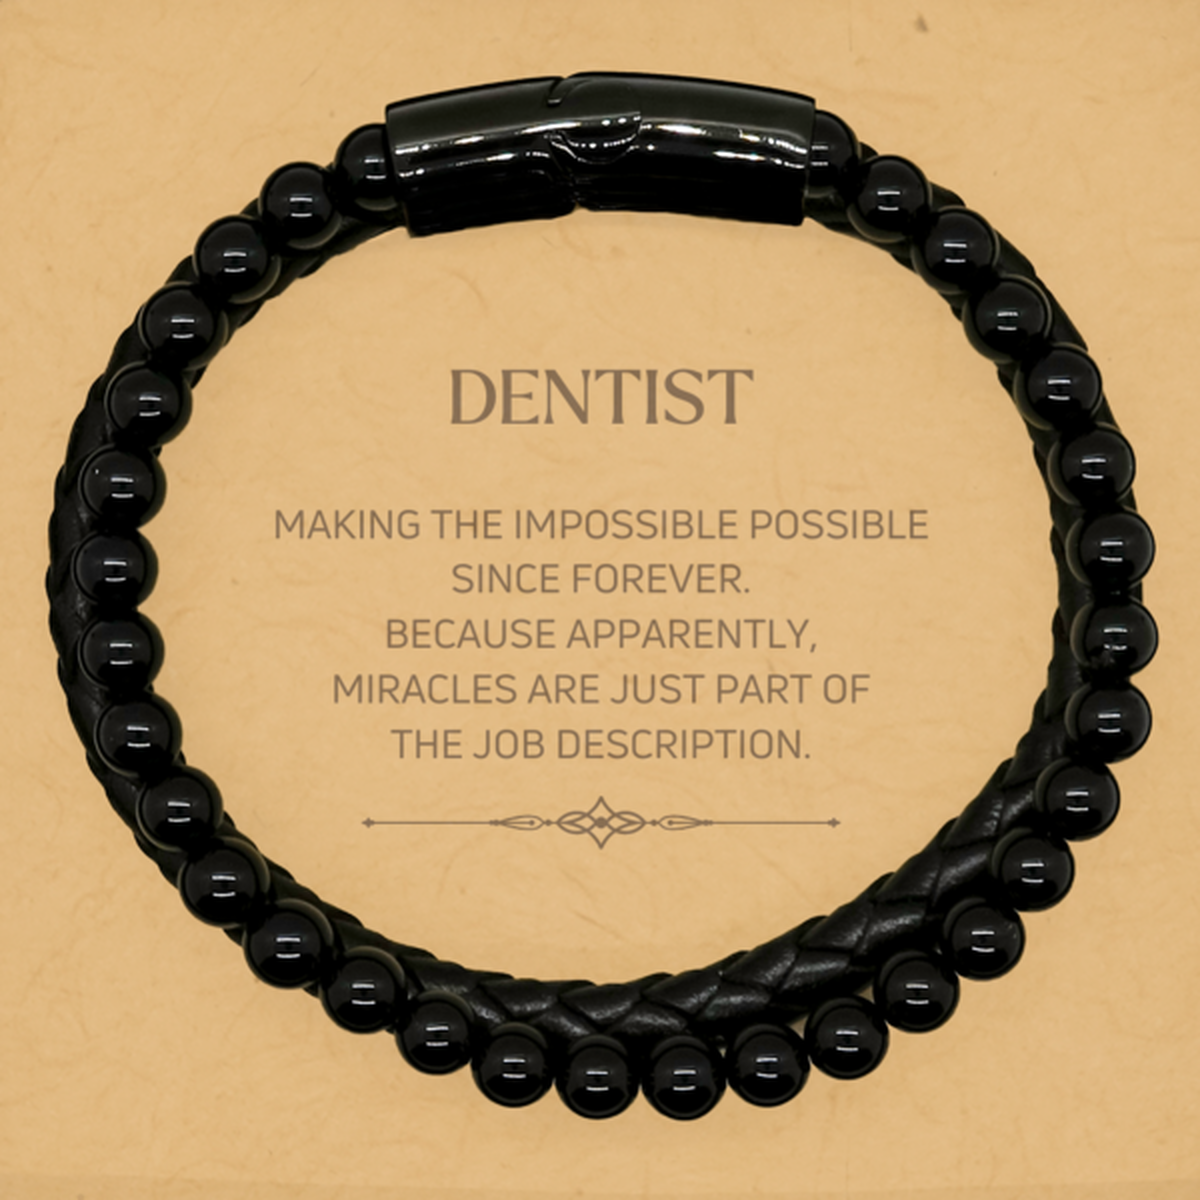 Funny Dentist Gifts, Miracles are just part of the job description, Inspirational Birthday Stone Leather Bracelets For Dentist, Men, Women, Coworkers, Friends, Boss